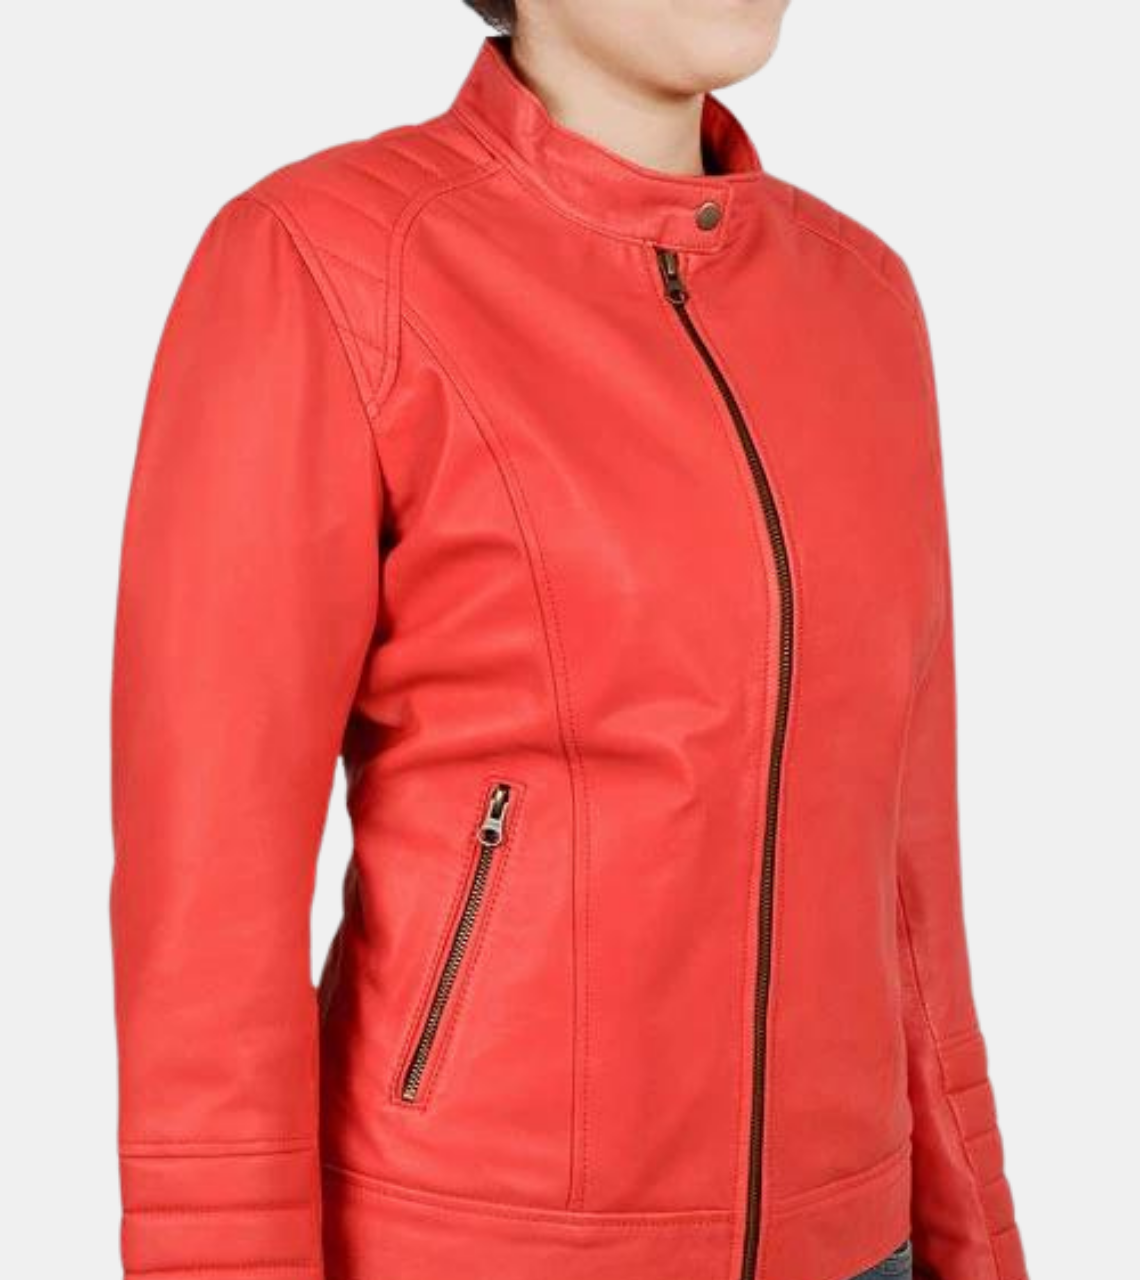 Windsor Red Leather Jacket For Women's